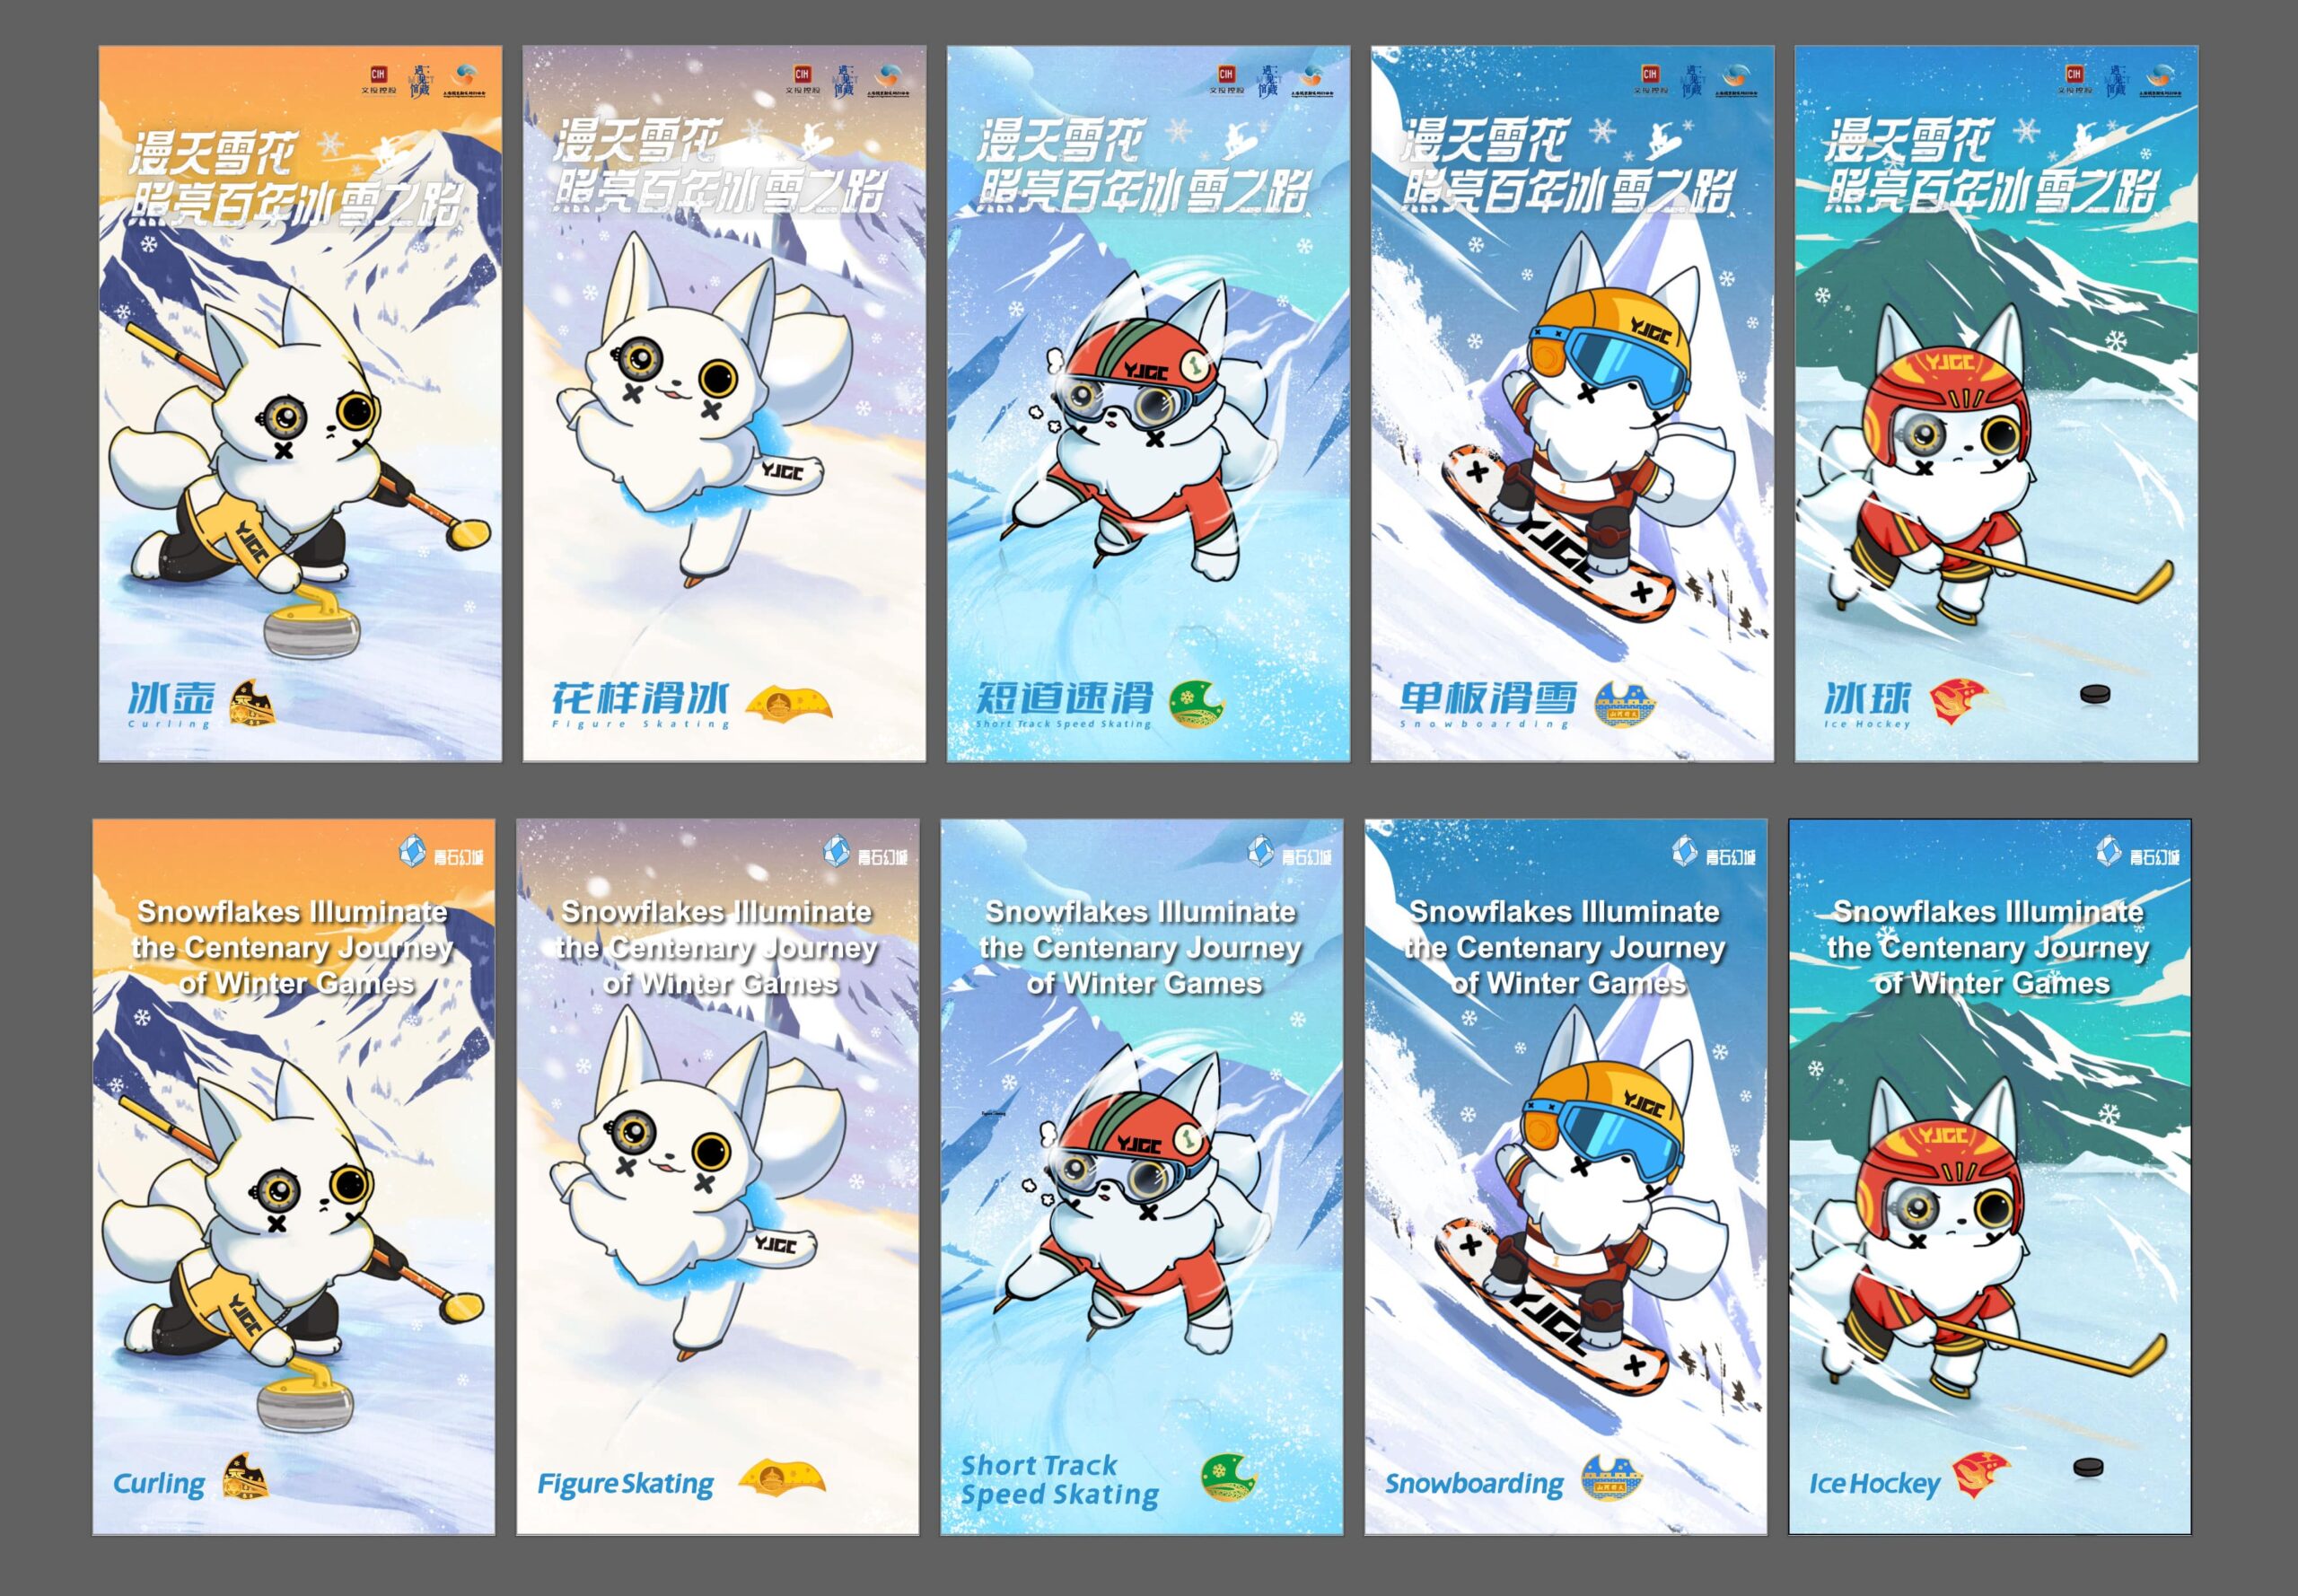 NFT collection from winter olympics beijing 2022